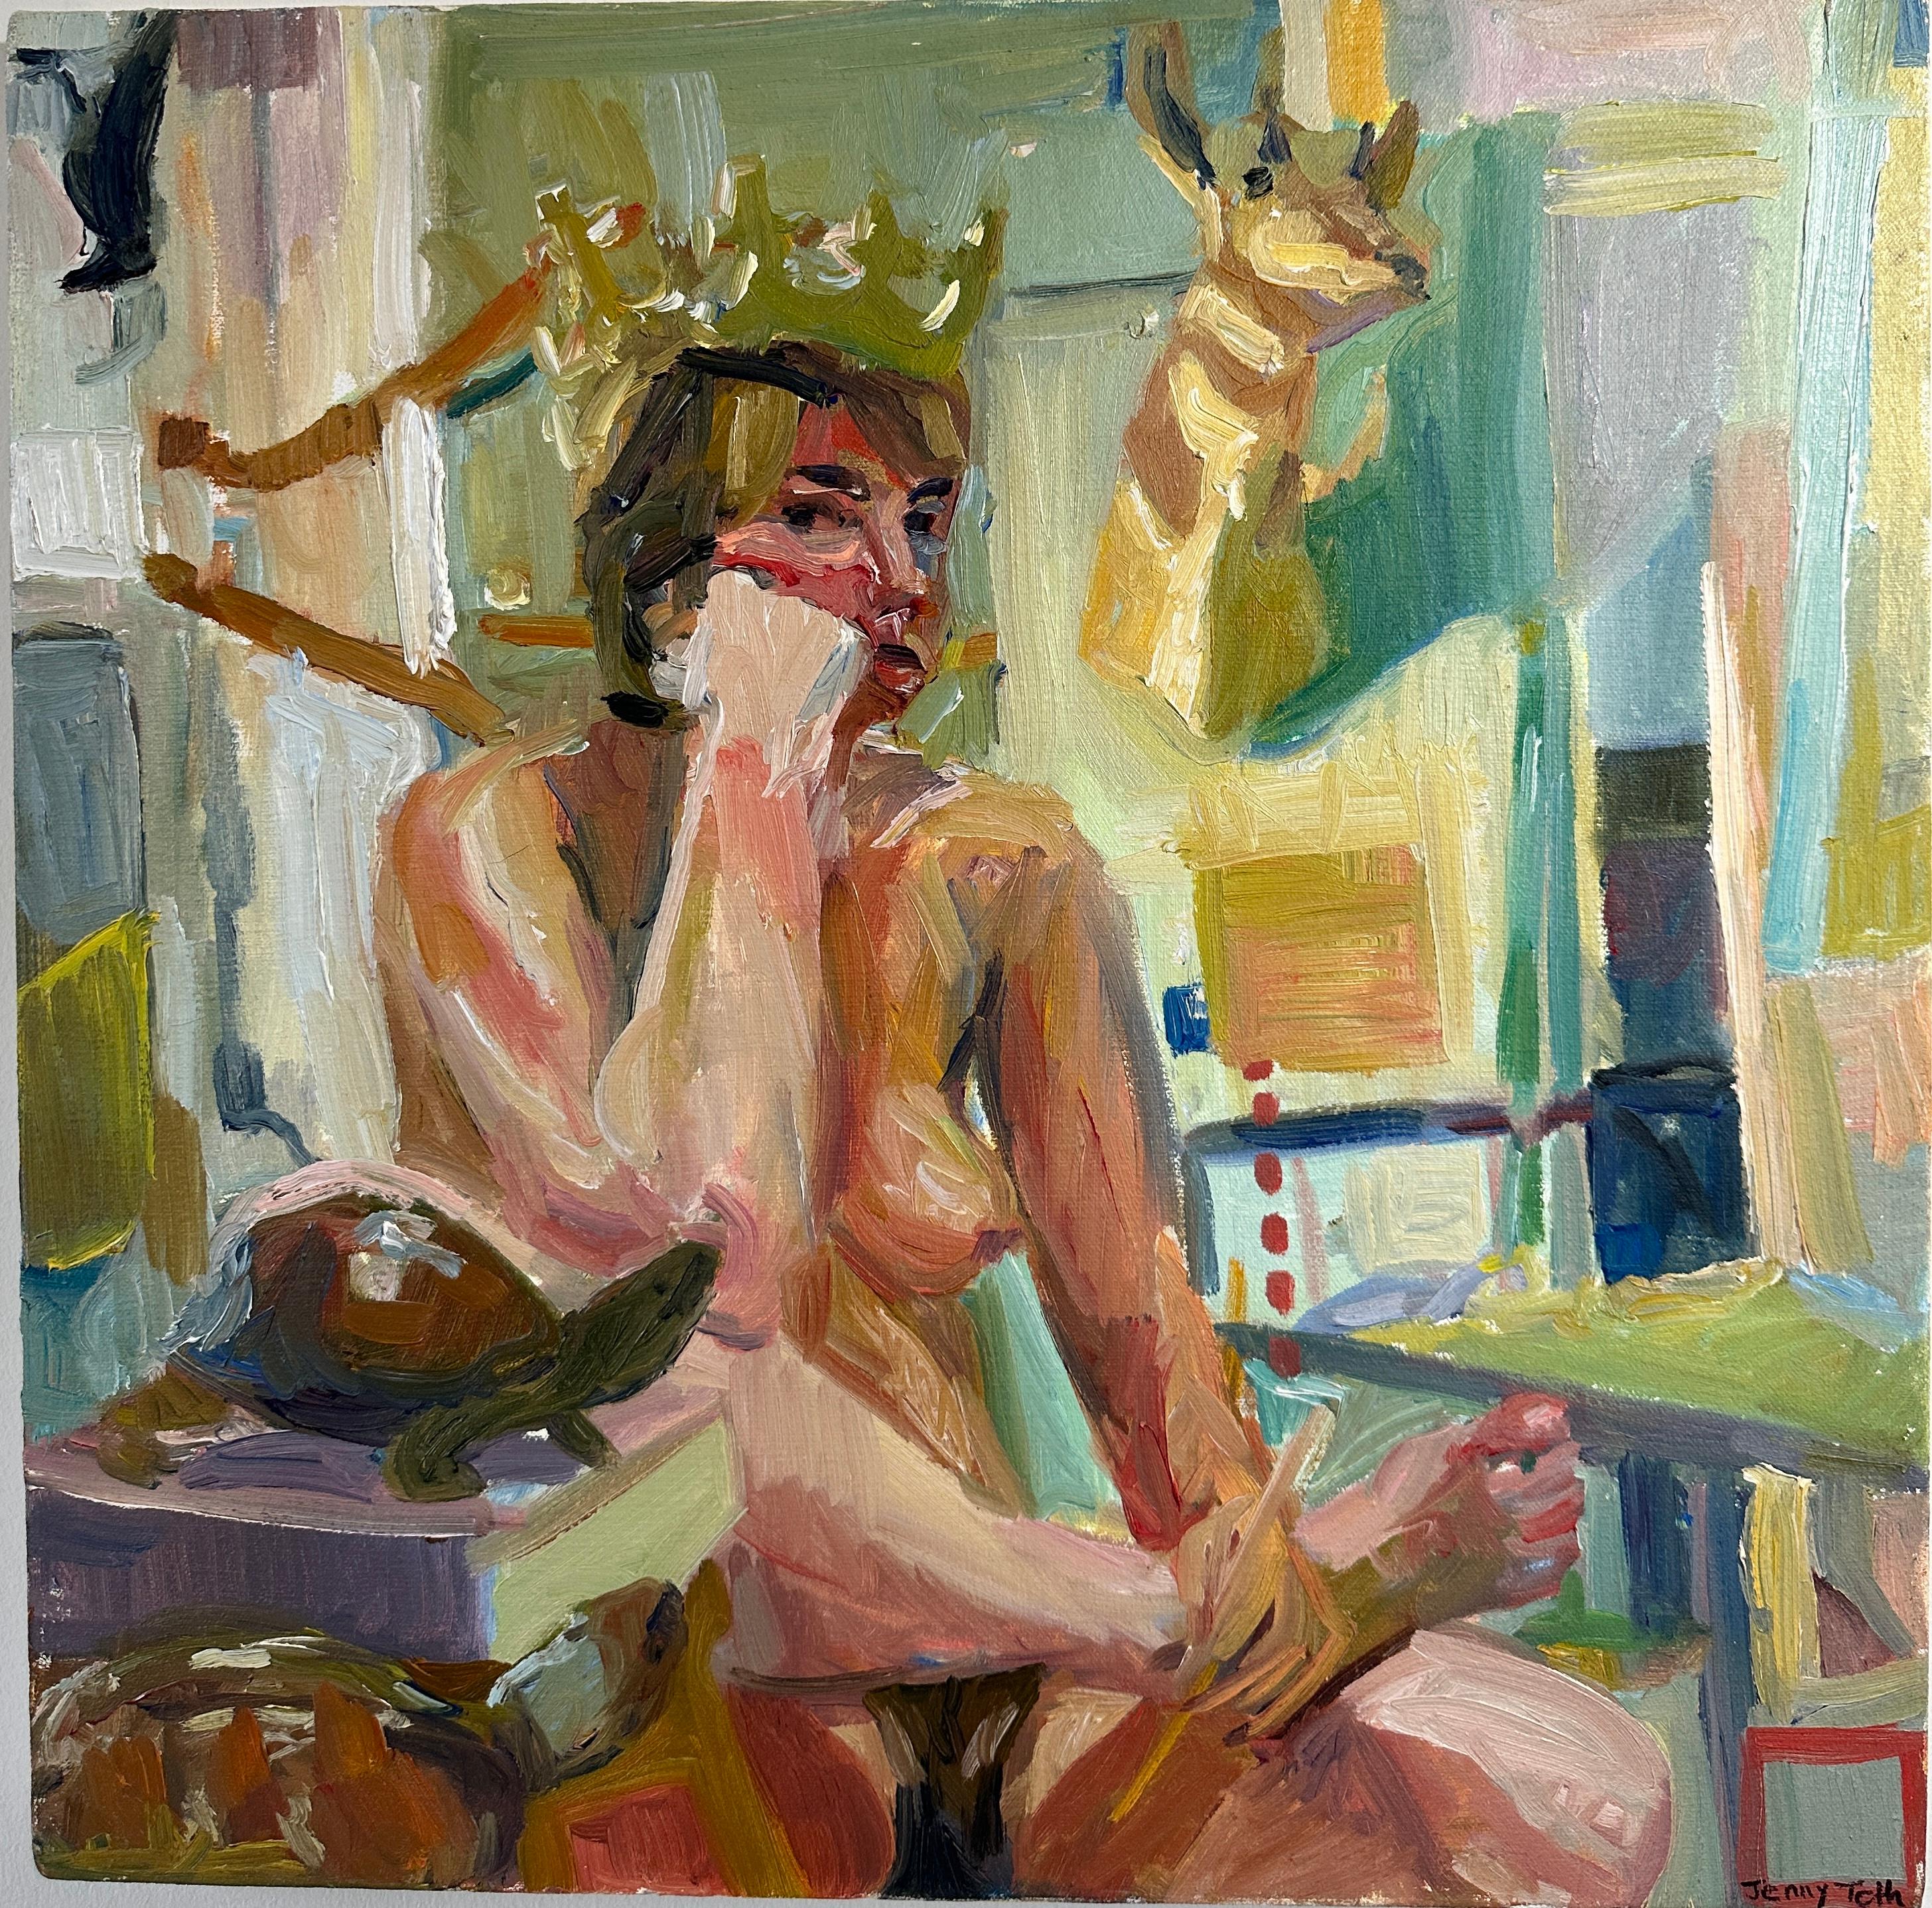 Ho-Humming with a Turtle and a Crown, female nude, giraffe, bold paint, animals